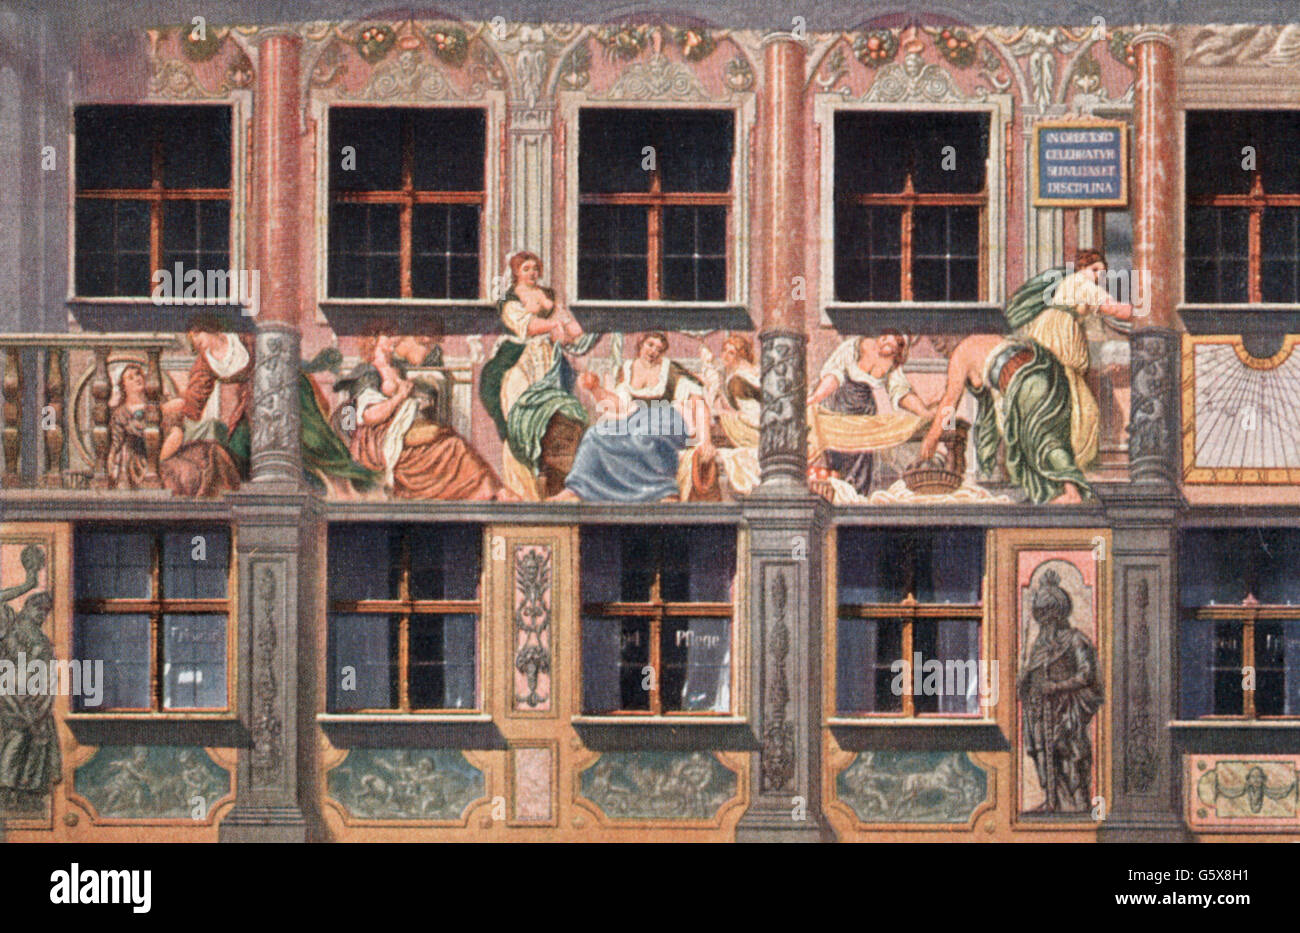 geography / travel,Germany,Augsburg,buildings,Weberhaus,exterior view,detail,south facade,Lucretia among her servants,mural painting by Matthias Kager,1607,art postcard,publisher J. J. Brack,1918,ancient world,ancient times,Roman legend,Lucretia,southern side,southern face,south side,south face,facade,facades,fresco,fine arts,art,17th century,weaver house,houses,postal card,postal cards,Swabia,Kingdom of Bavaria,Germany,German Empire,Imperial Era,Central Europe,1910s,10s,20th century,people,building,buildings,detail,,Additional-Rights-Clearences-Not Available Stock Photo